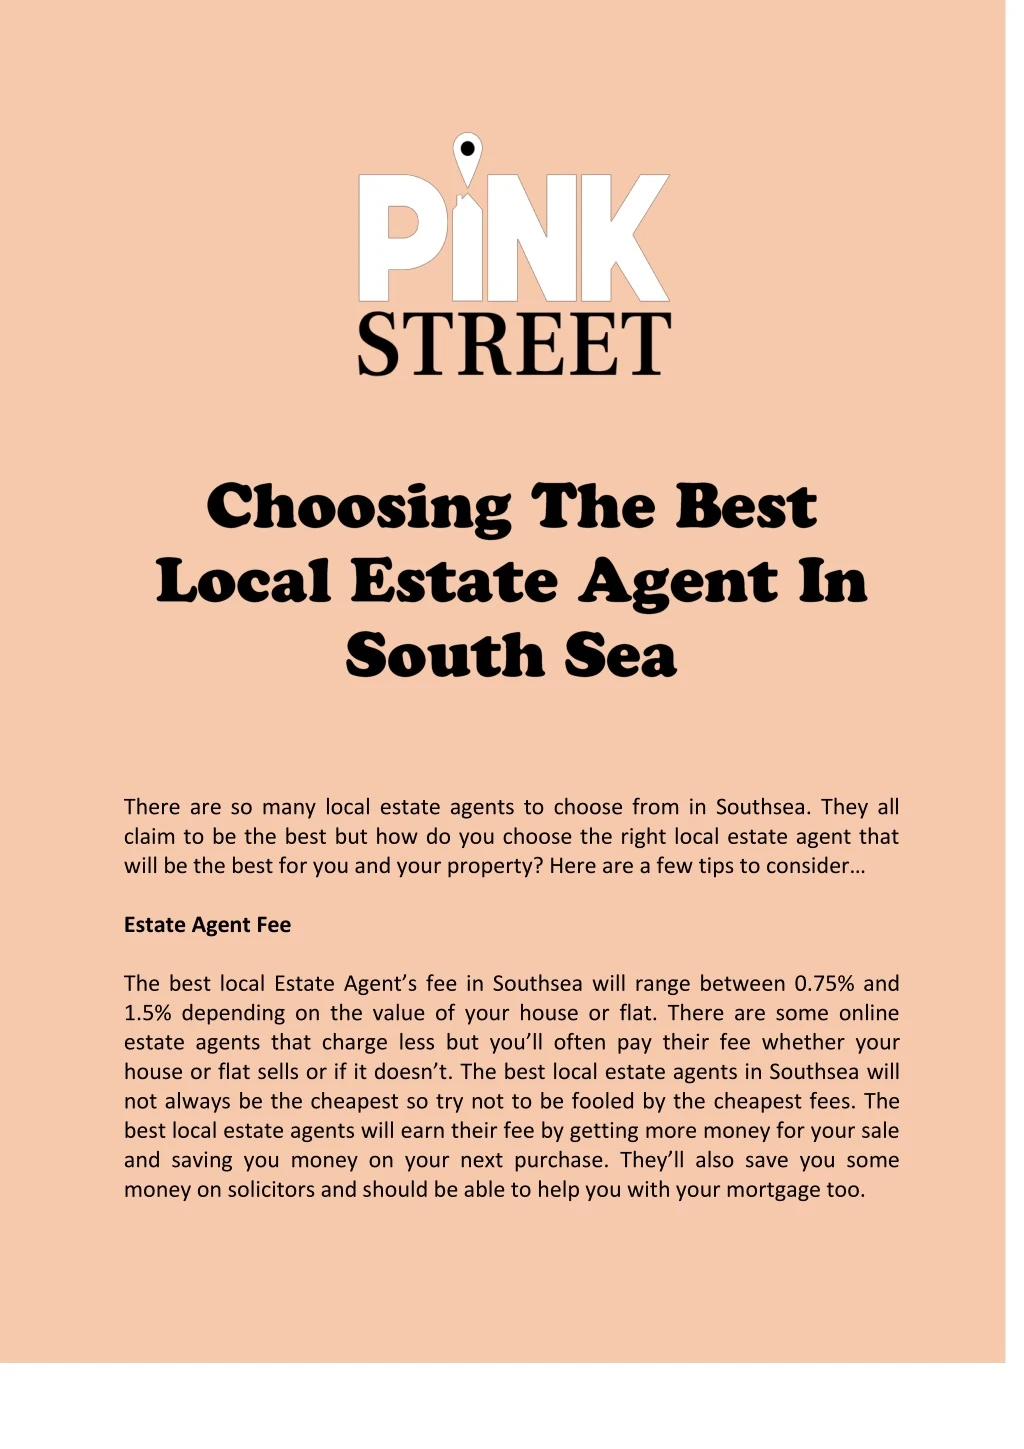 there are so many local estate agents to choose